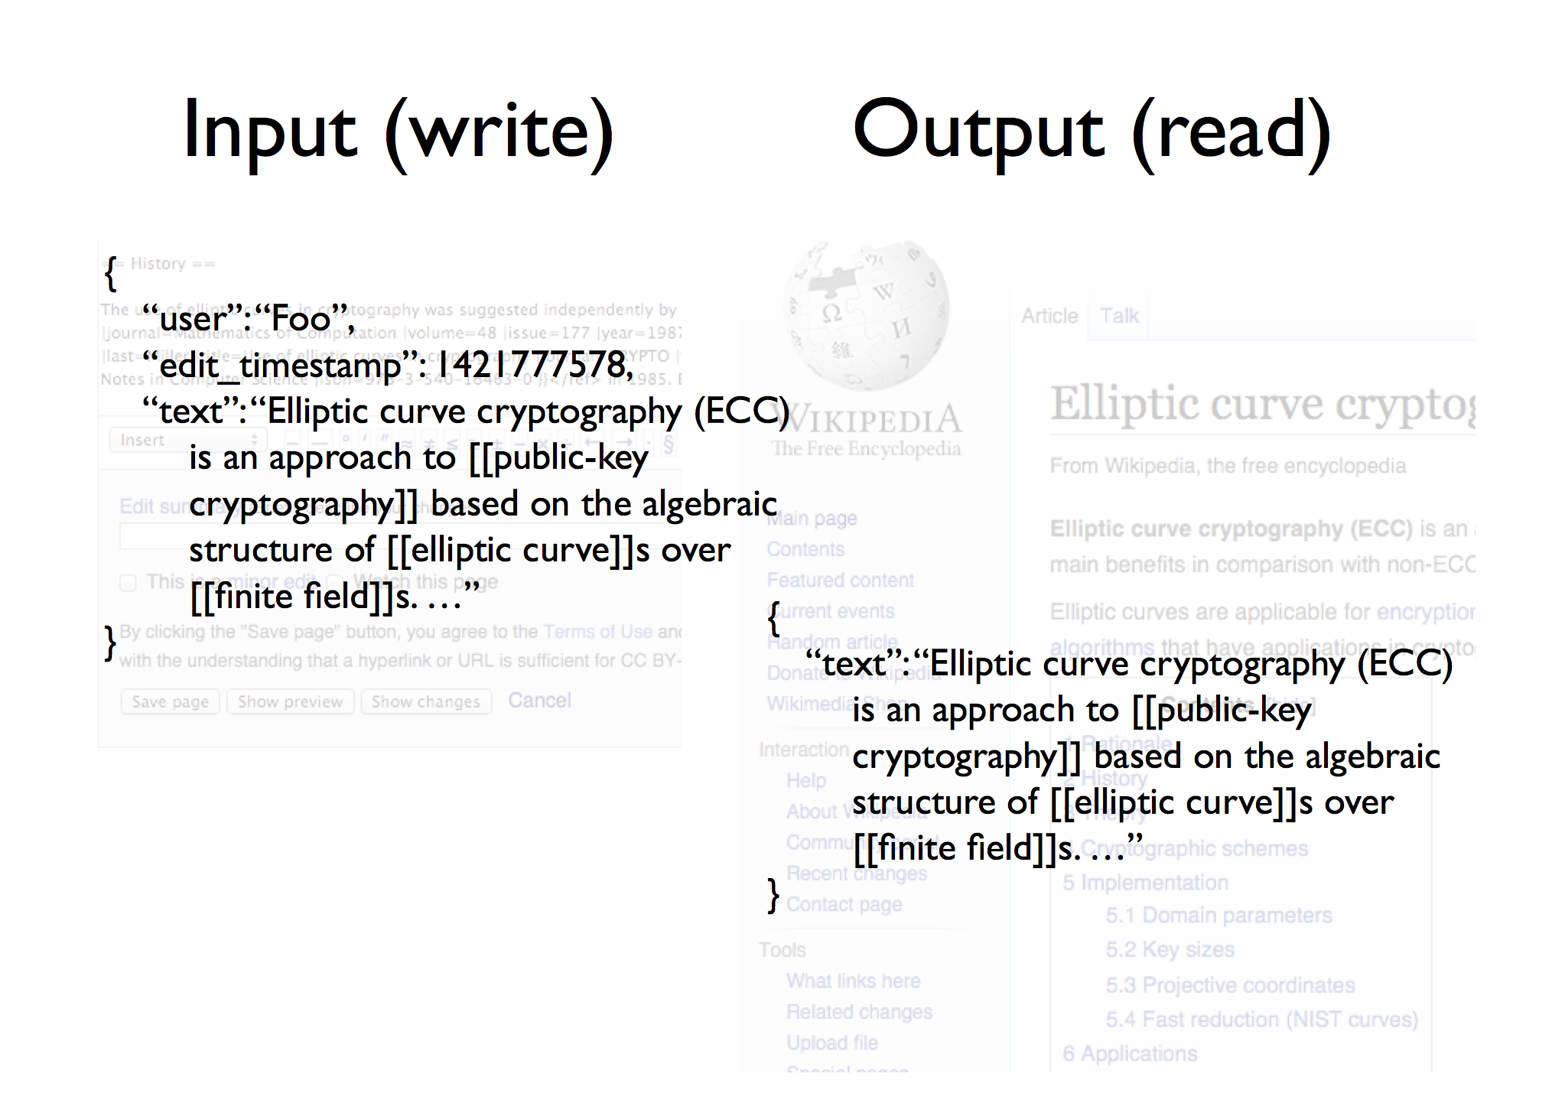 On Wikipedia, the input and the output are almost the same.